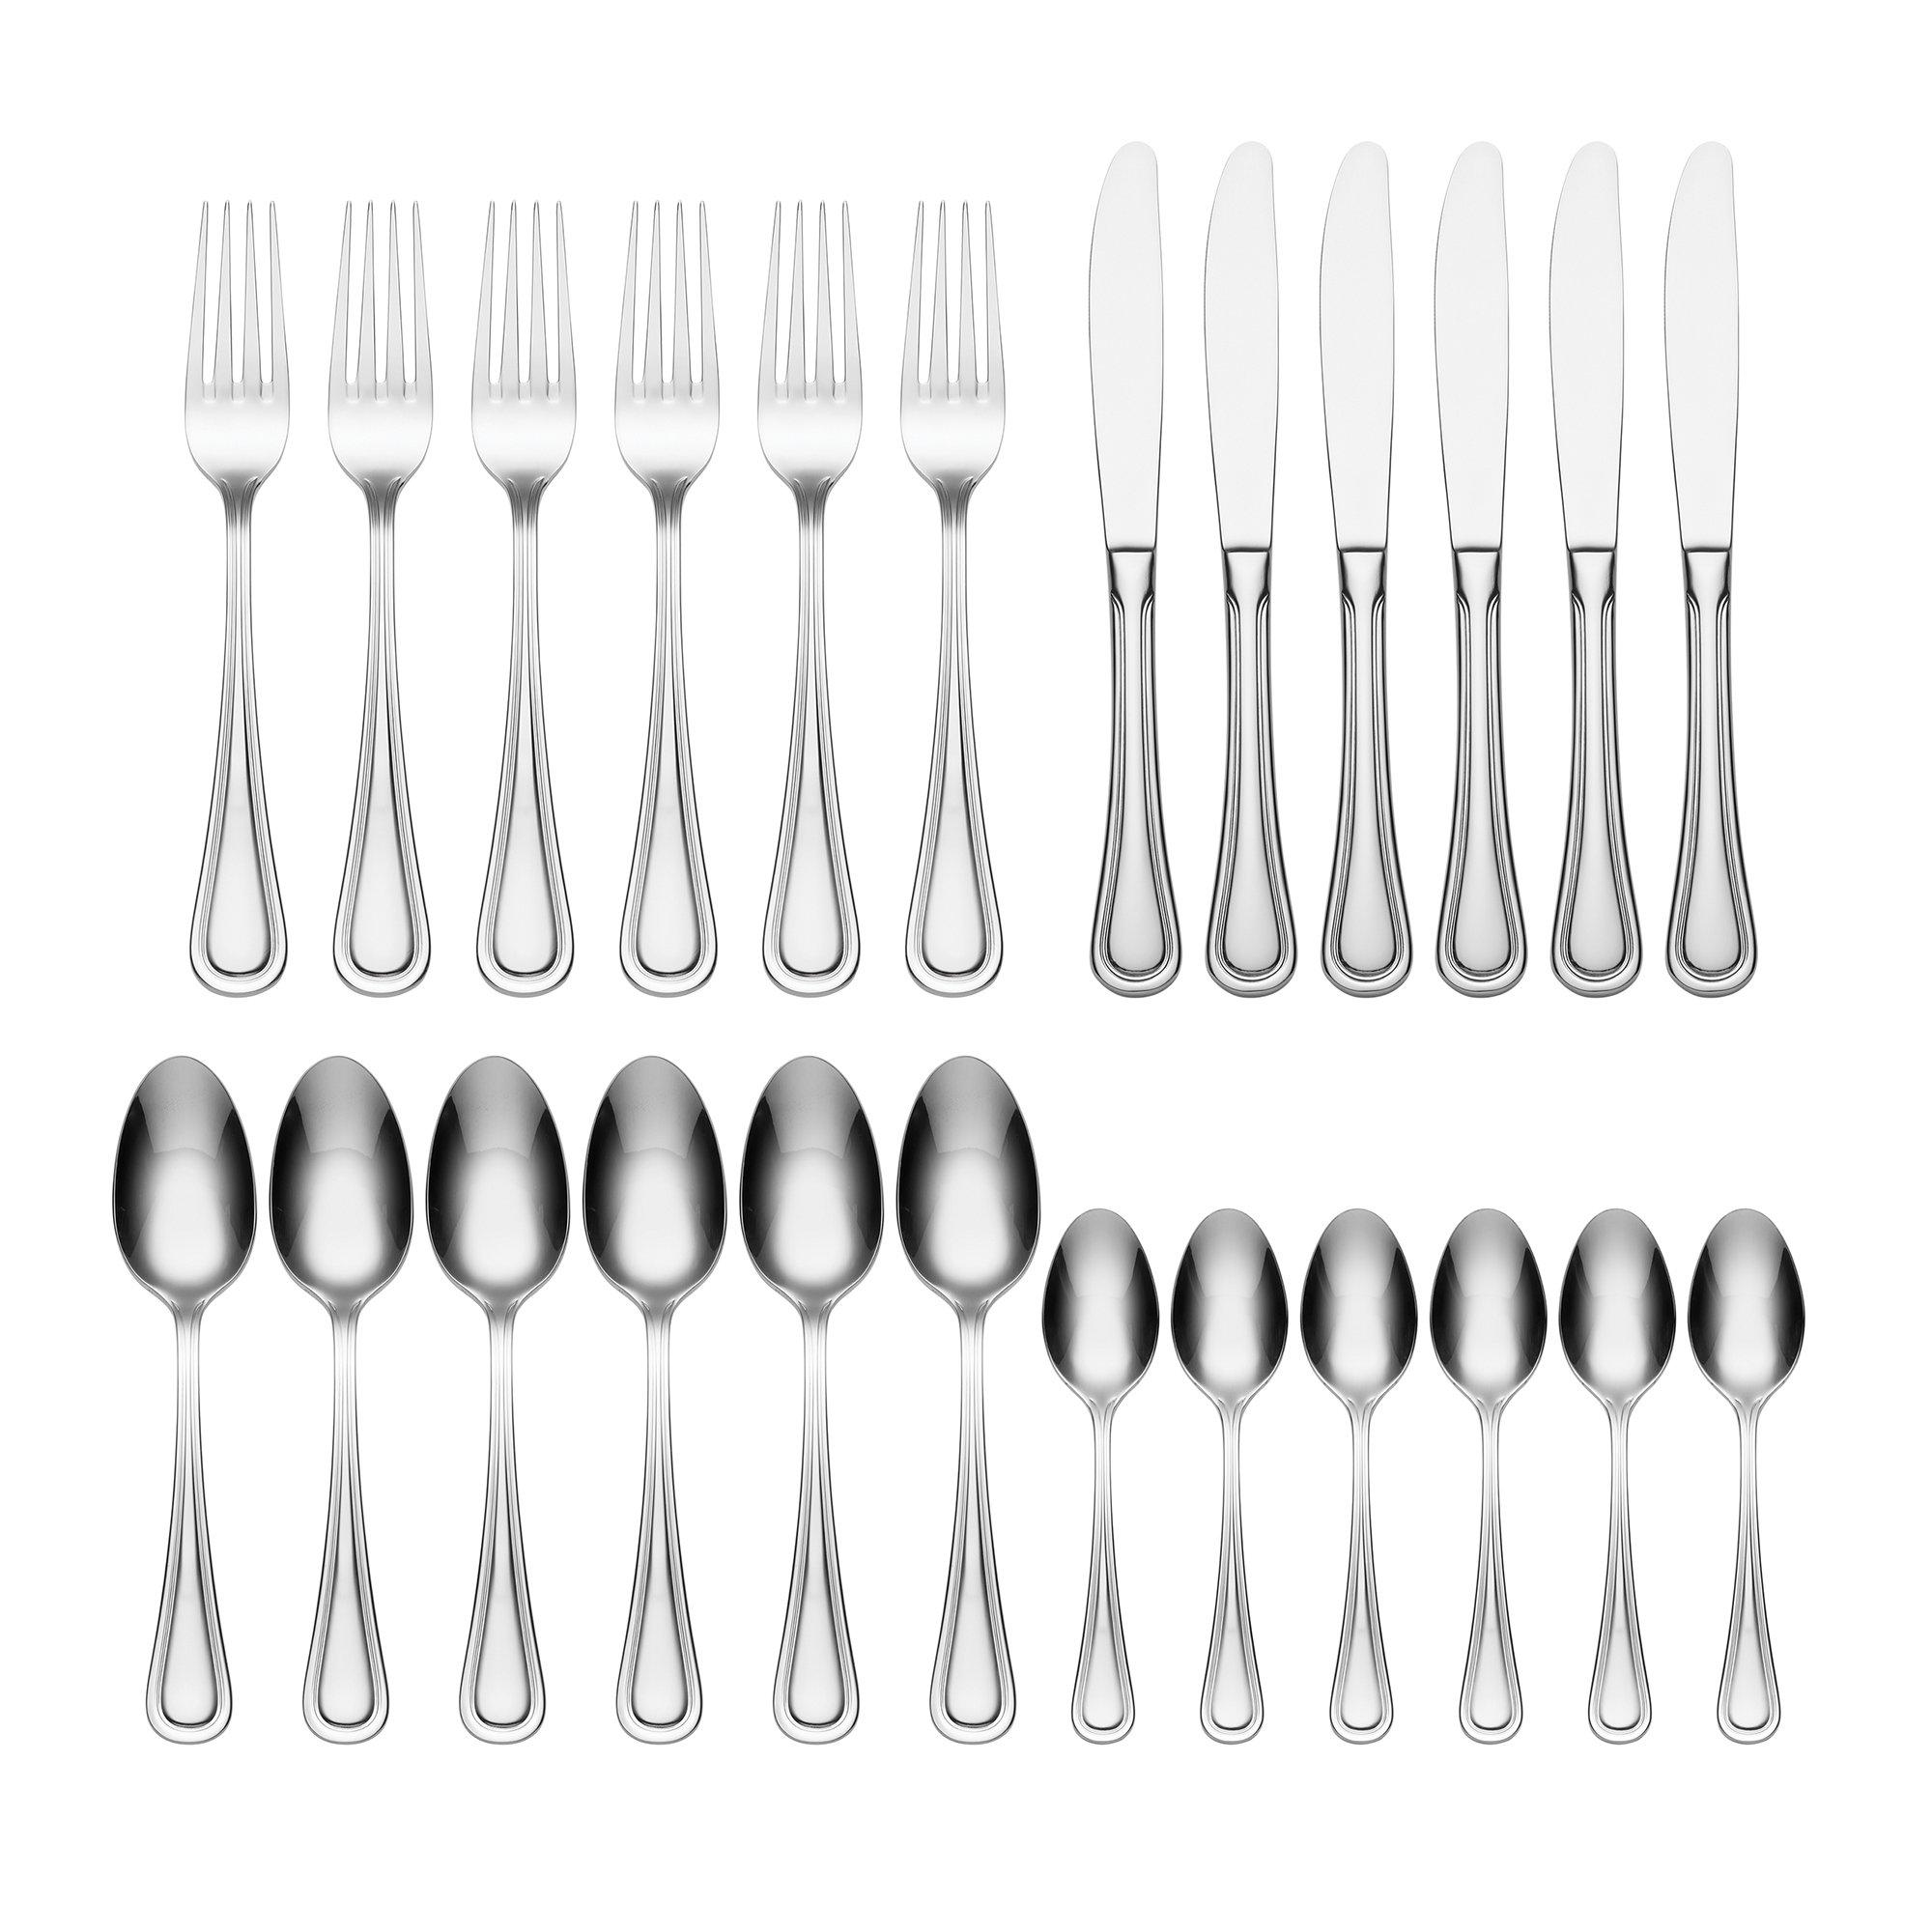 Barcelona 24 Piece Culterly Set, Stainless Steel, Rust Resistant, Dishwasher Safe